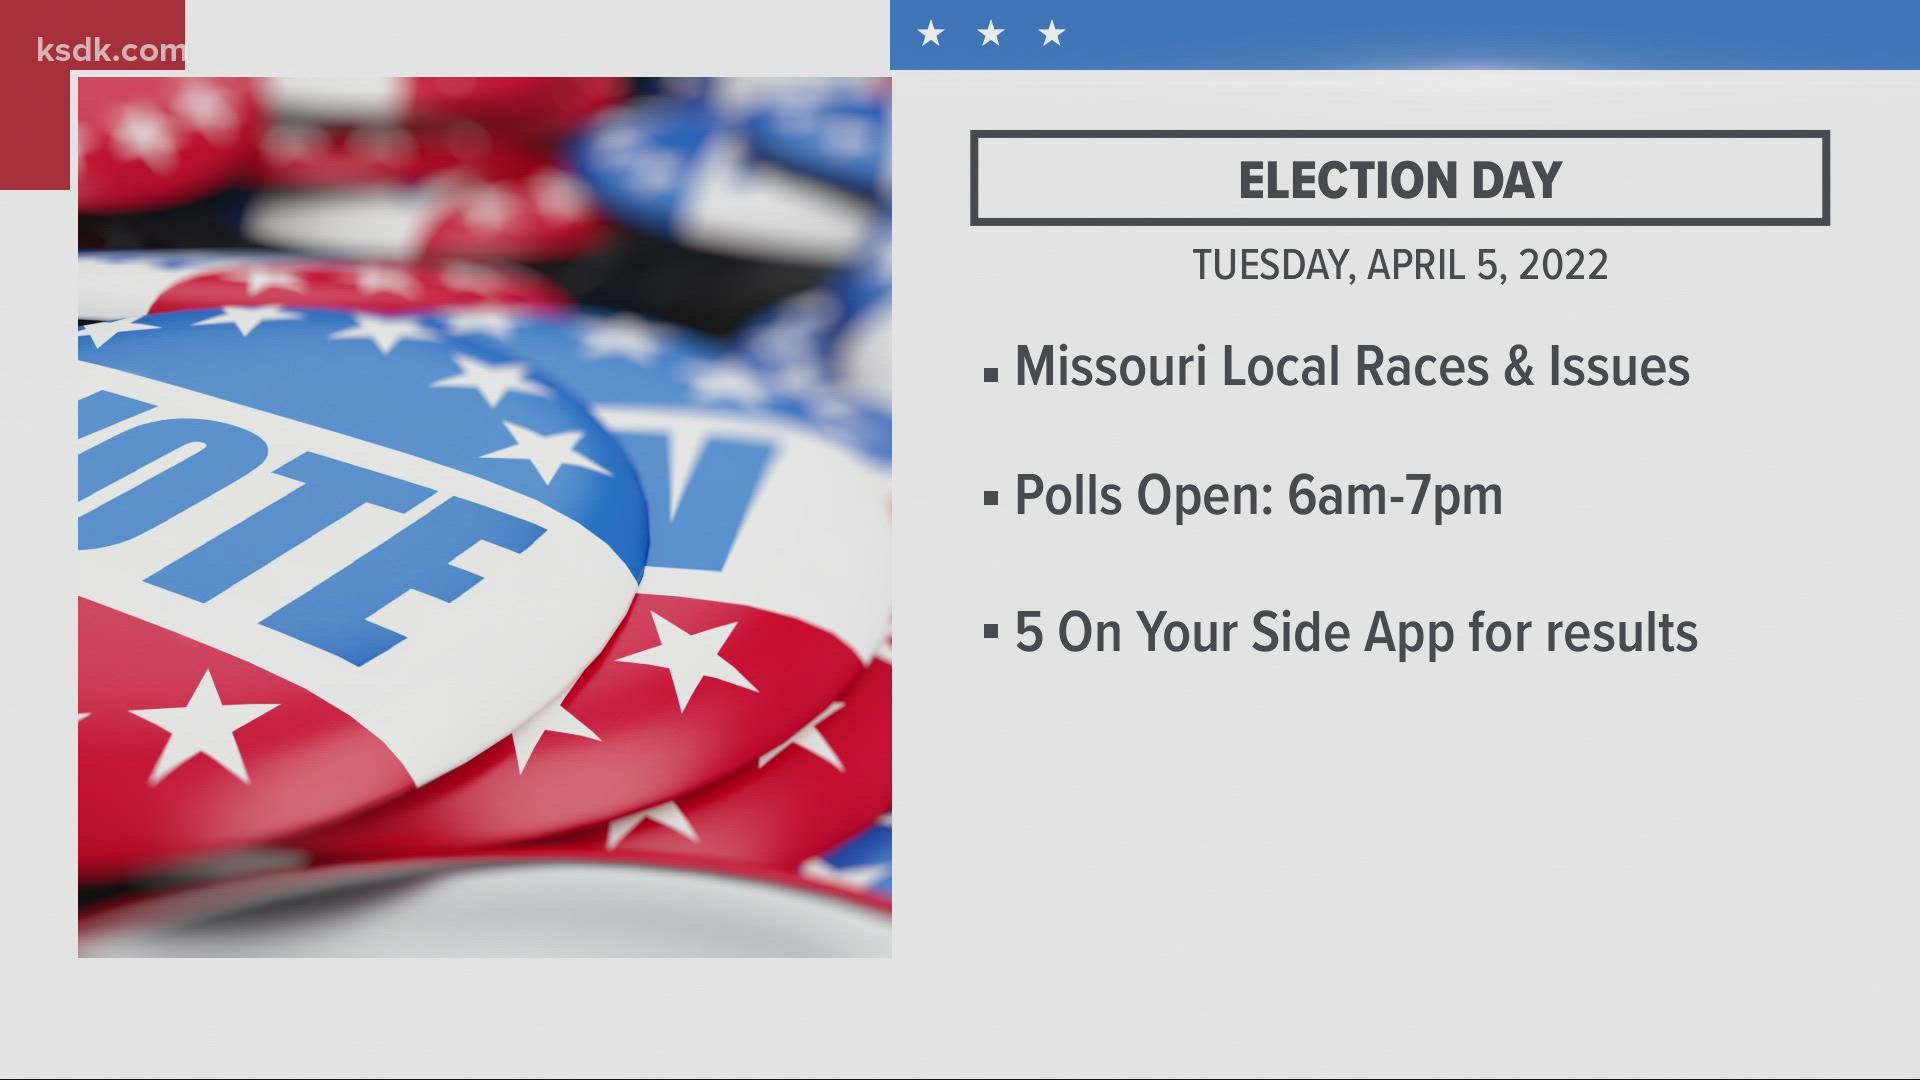 Missouri voters are taking to the polls Tuesday to weigh in on important municipal elections.
Several areas are considering amendments, propositions and taxes.